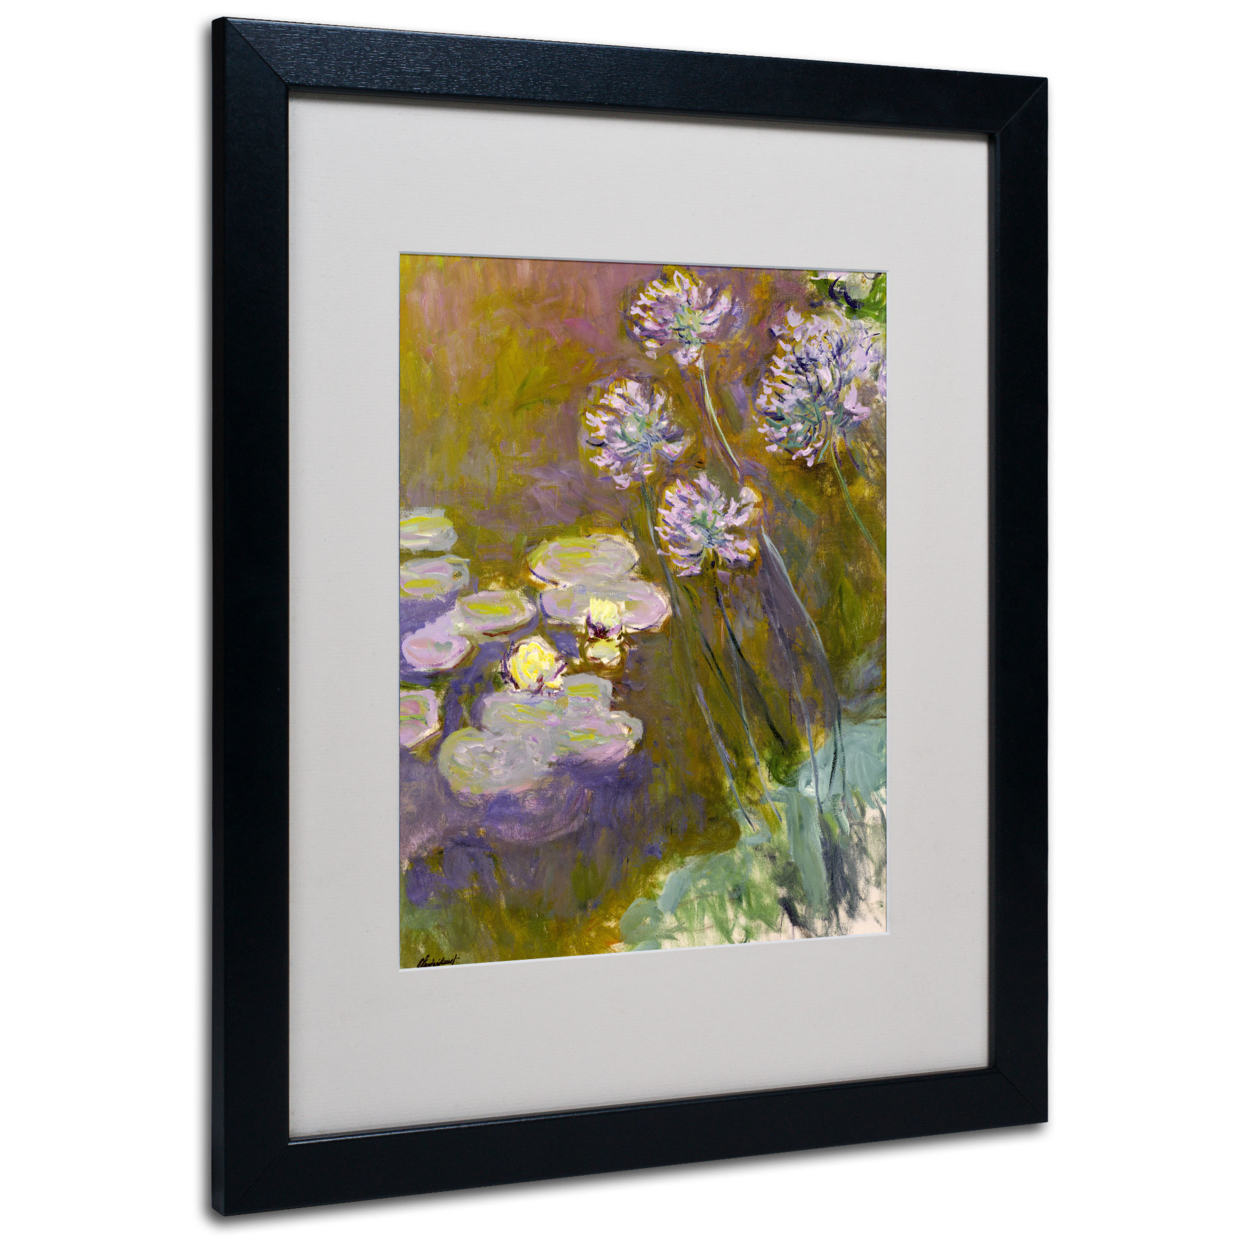 Claude Monet 'Waterlilies And Agapanthus' Black Wooden Framed Art 18 X 22 Inches